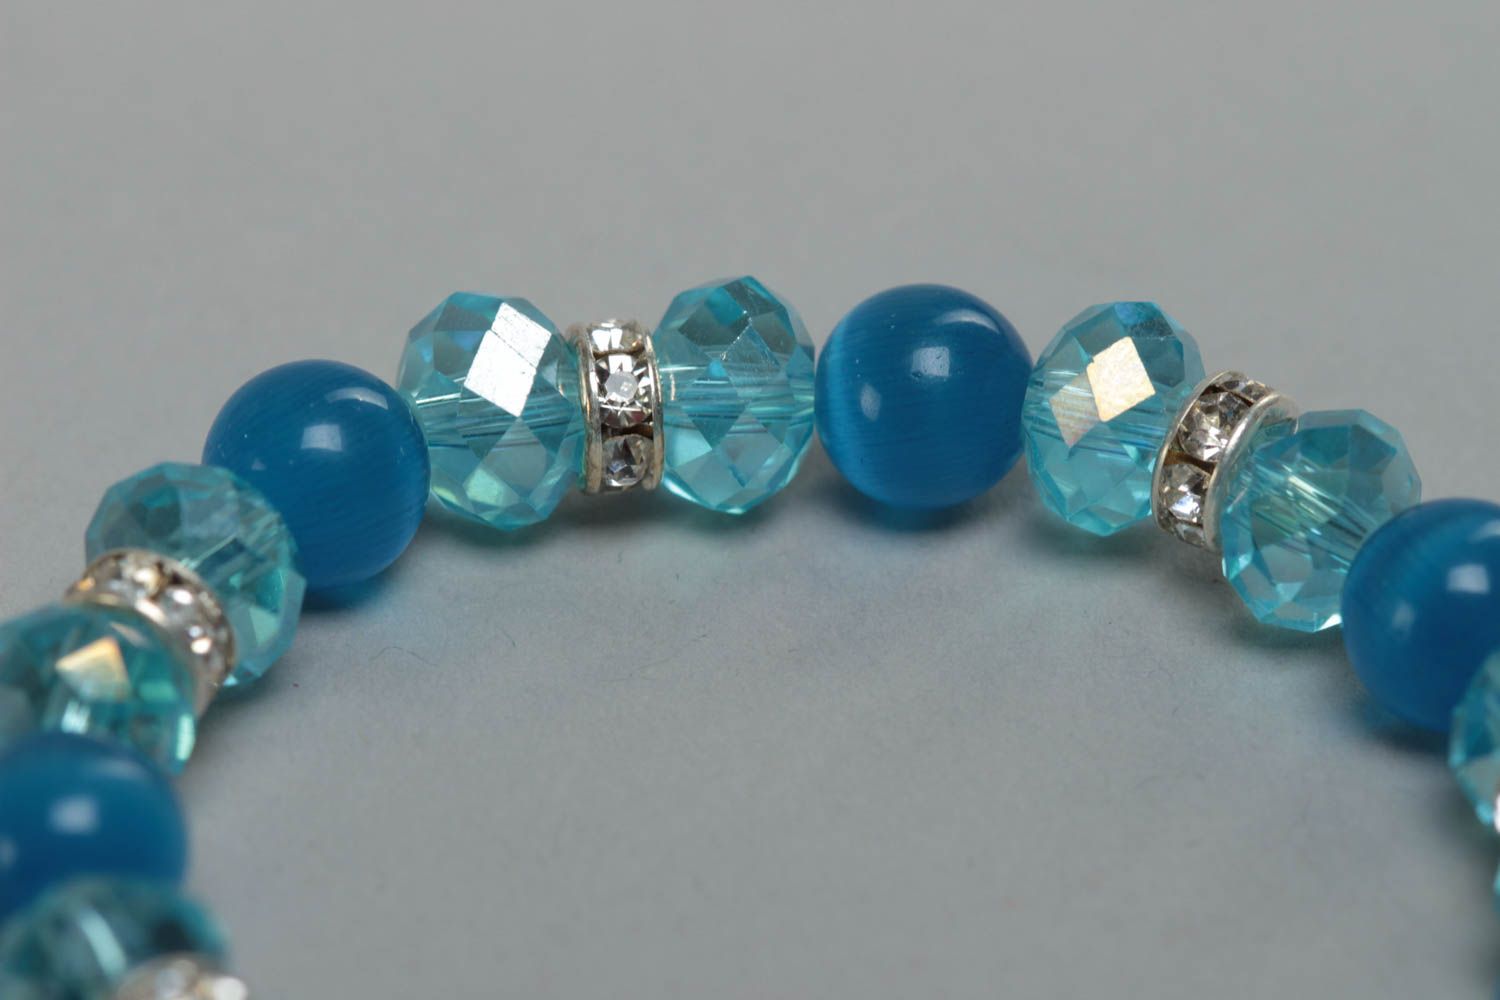 Child's Elasticated Bracelet with turquoise and silver beads